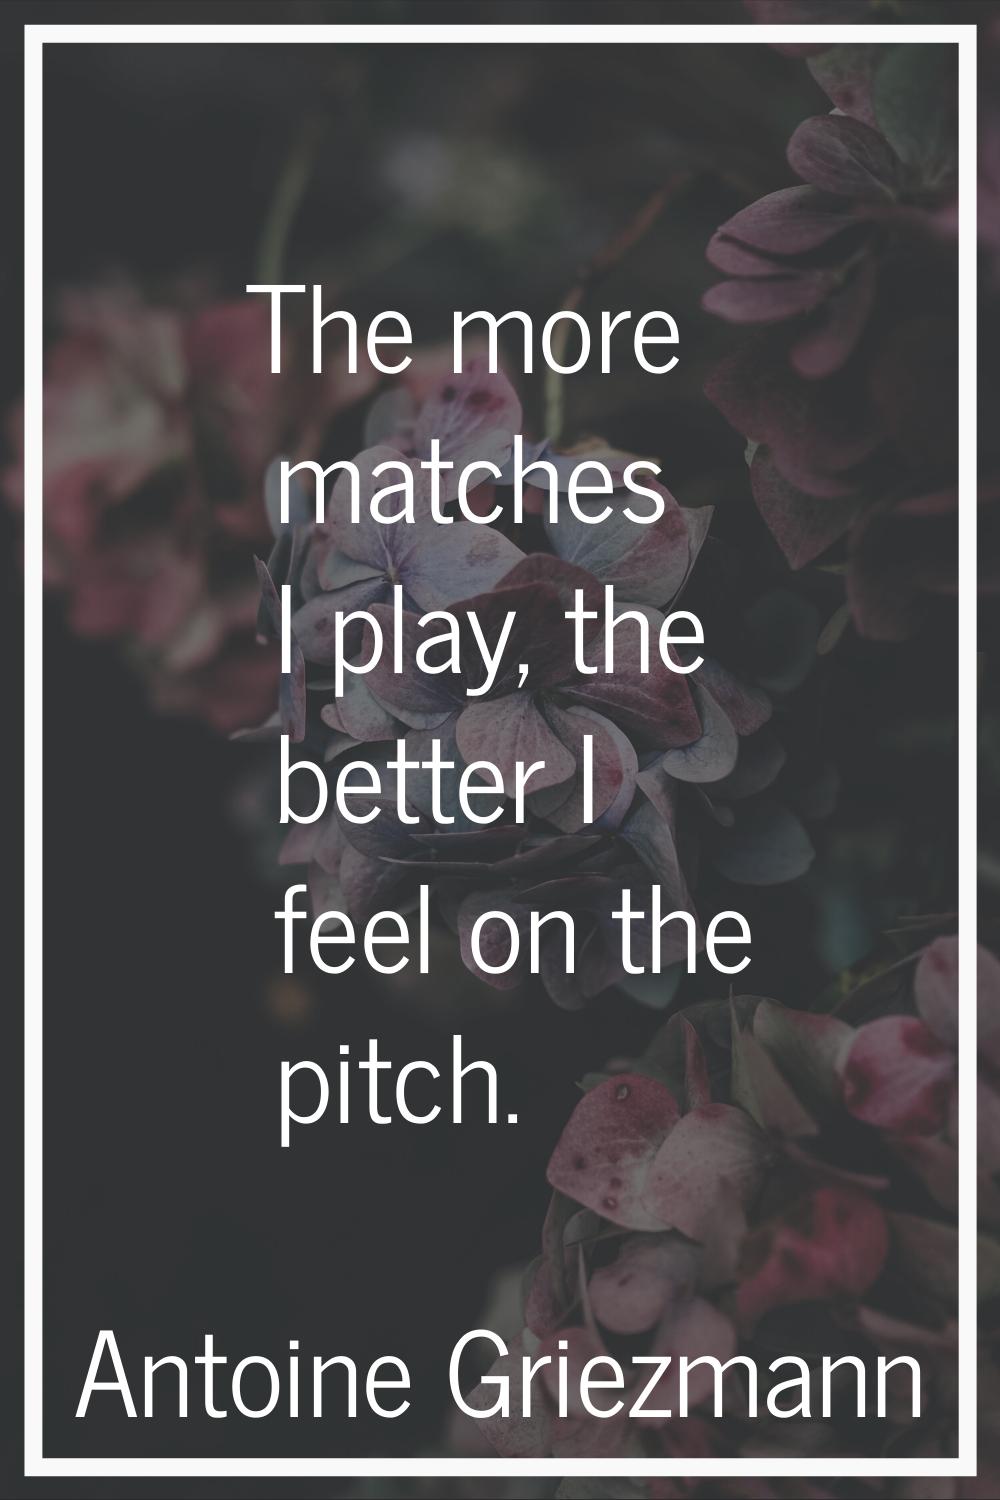 The more matches I play, the better I feel on the pitch.